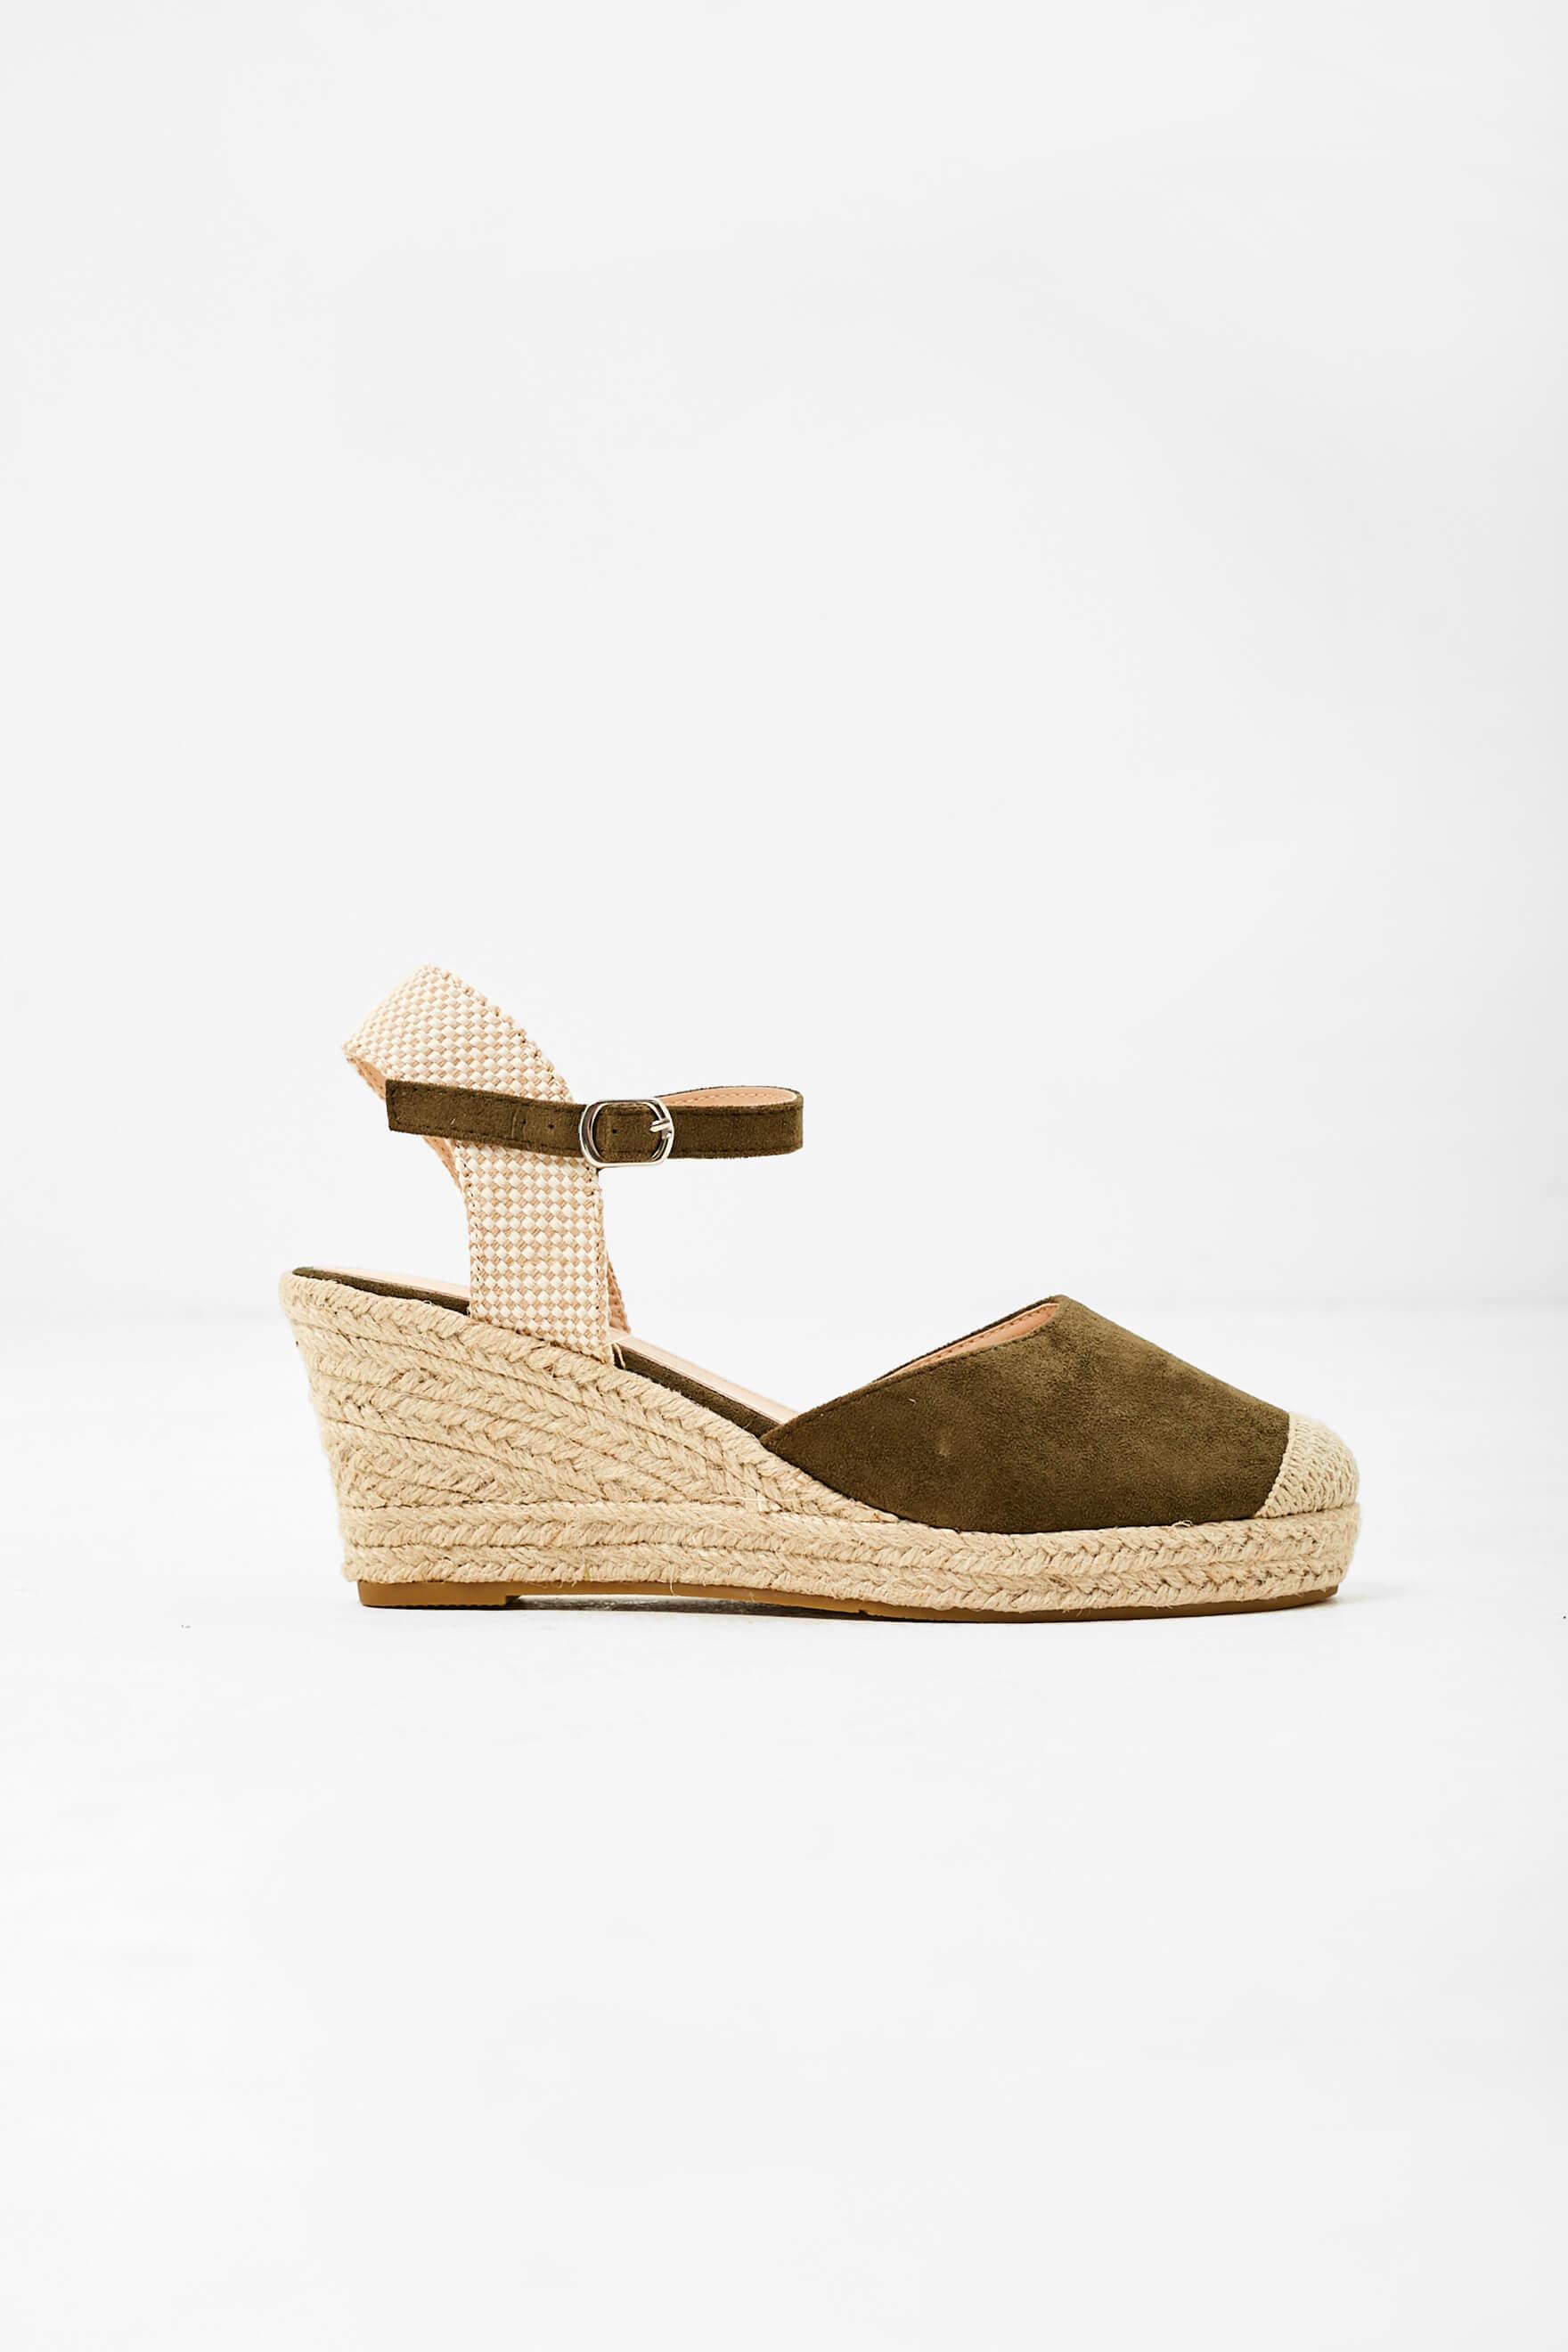 No Doubt Jadyn Suede Espadrille Wedges in Olive Green | iCLOTHING ...